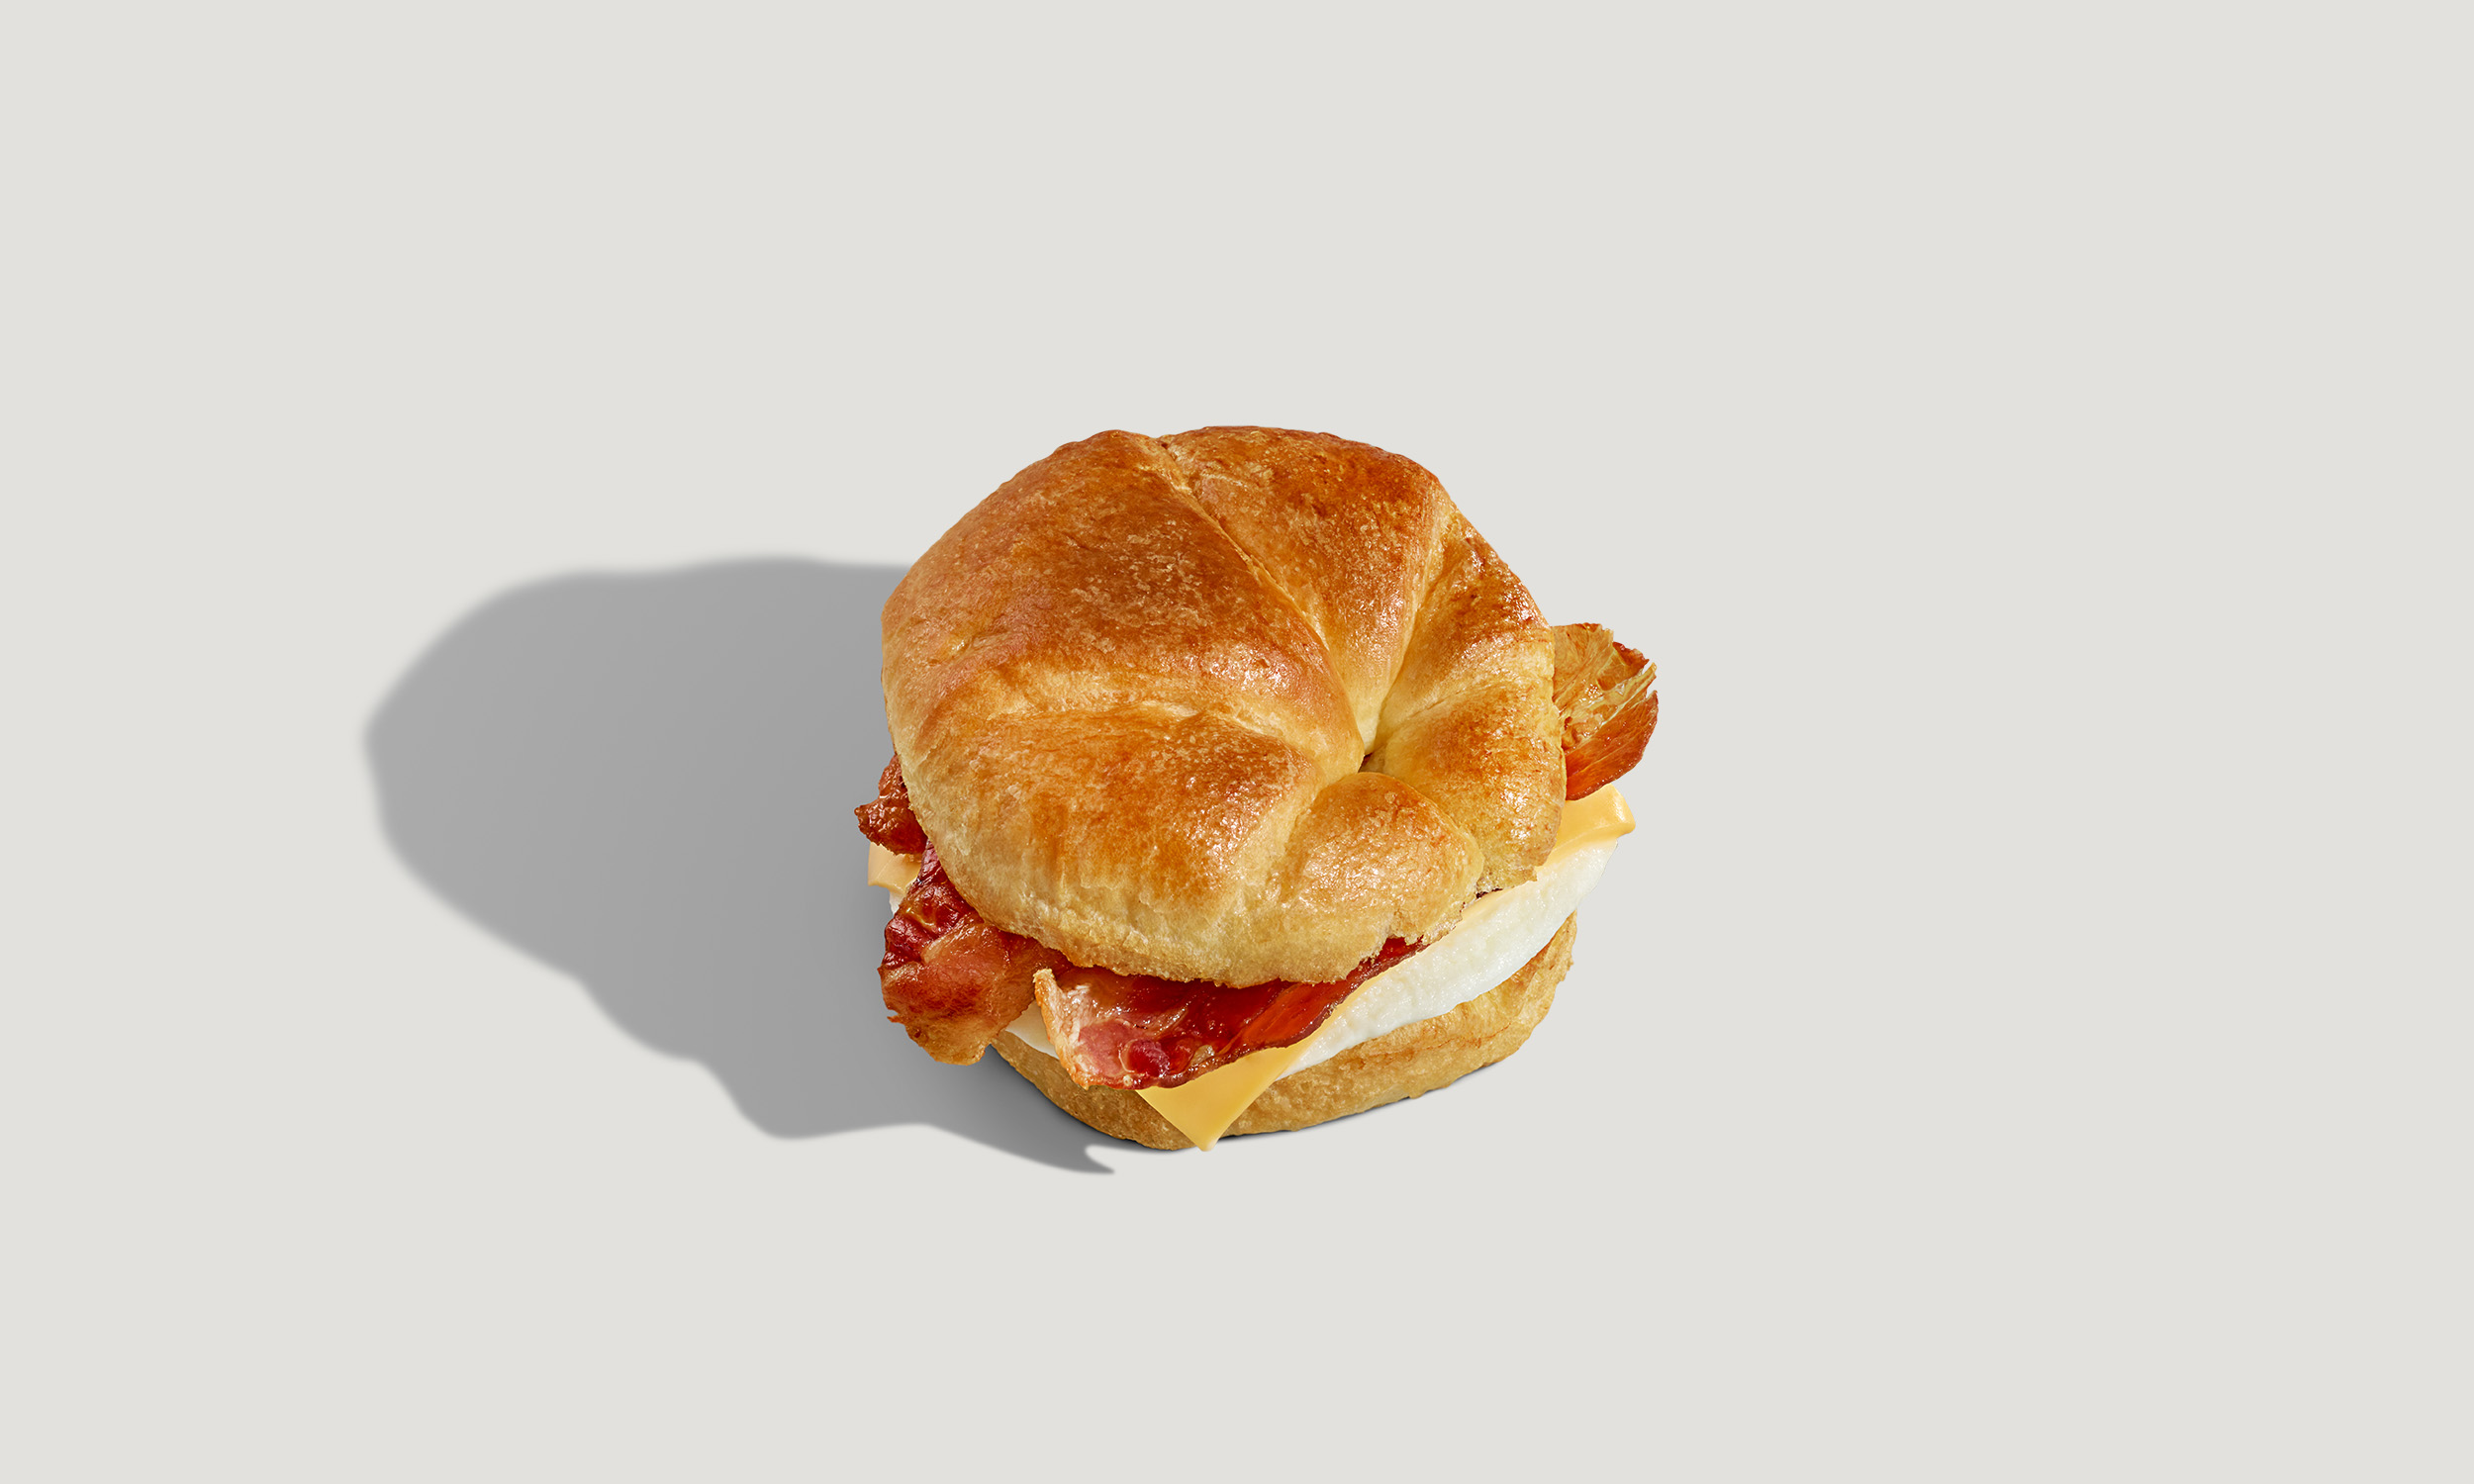 Speedway_IsometricProductPhotography_Croissant.jpg